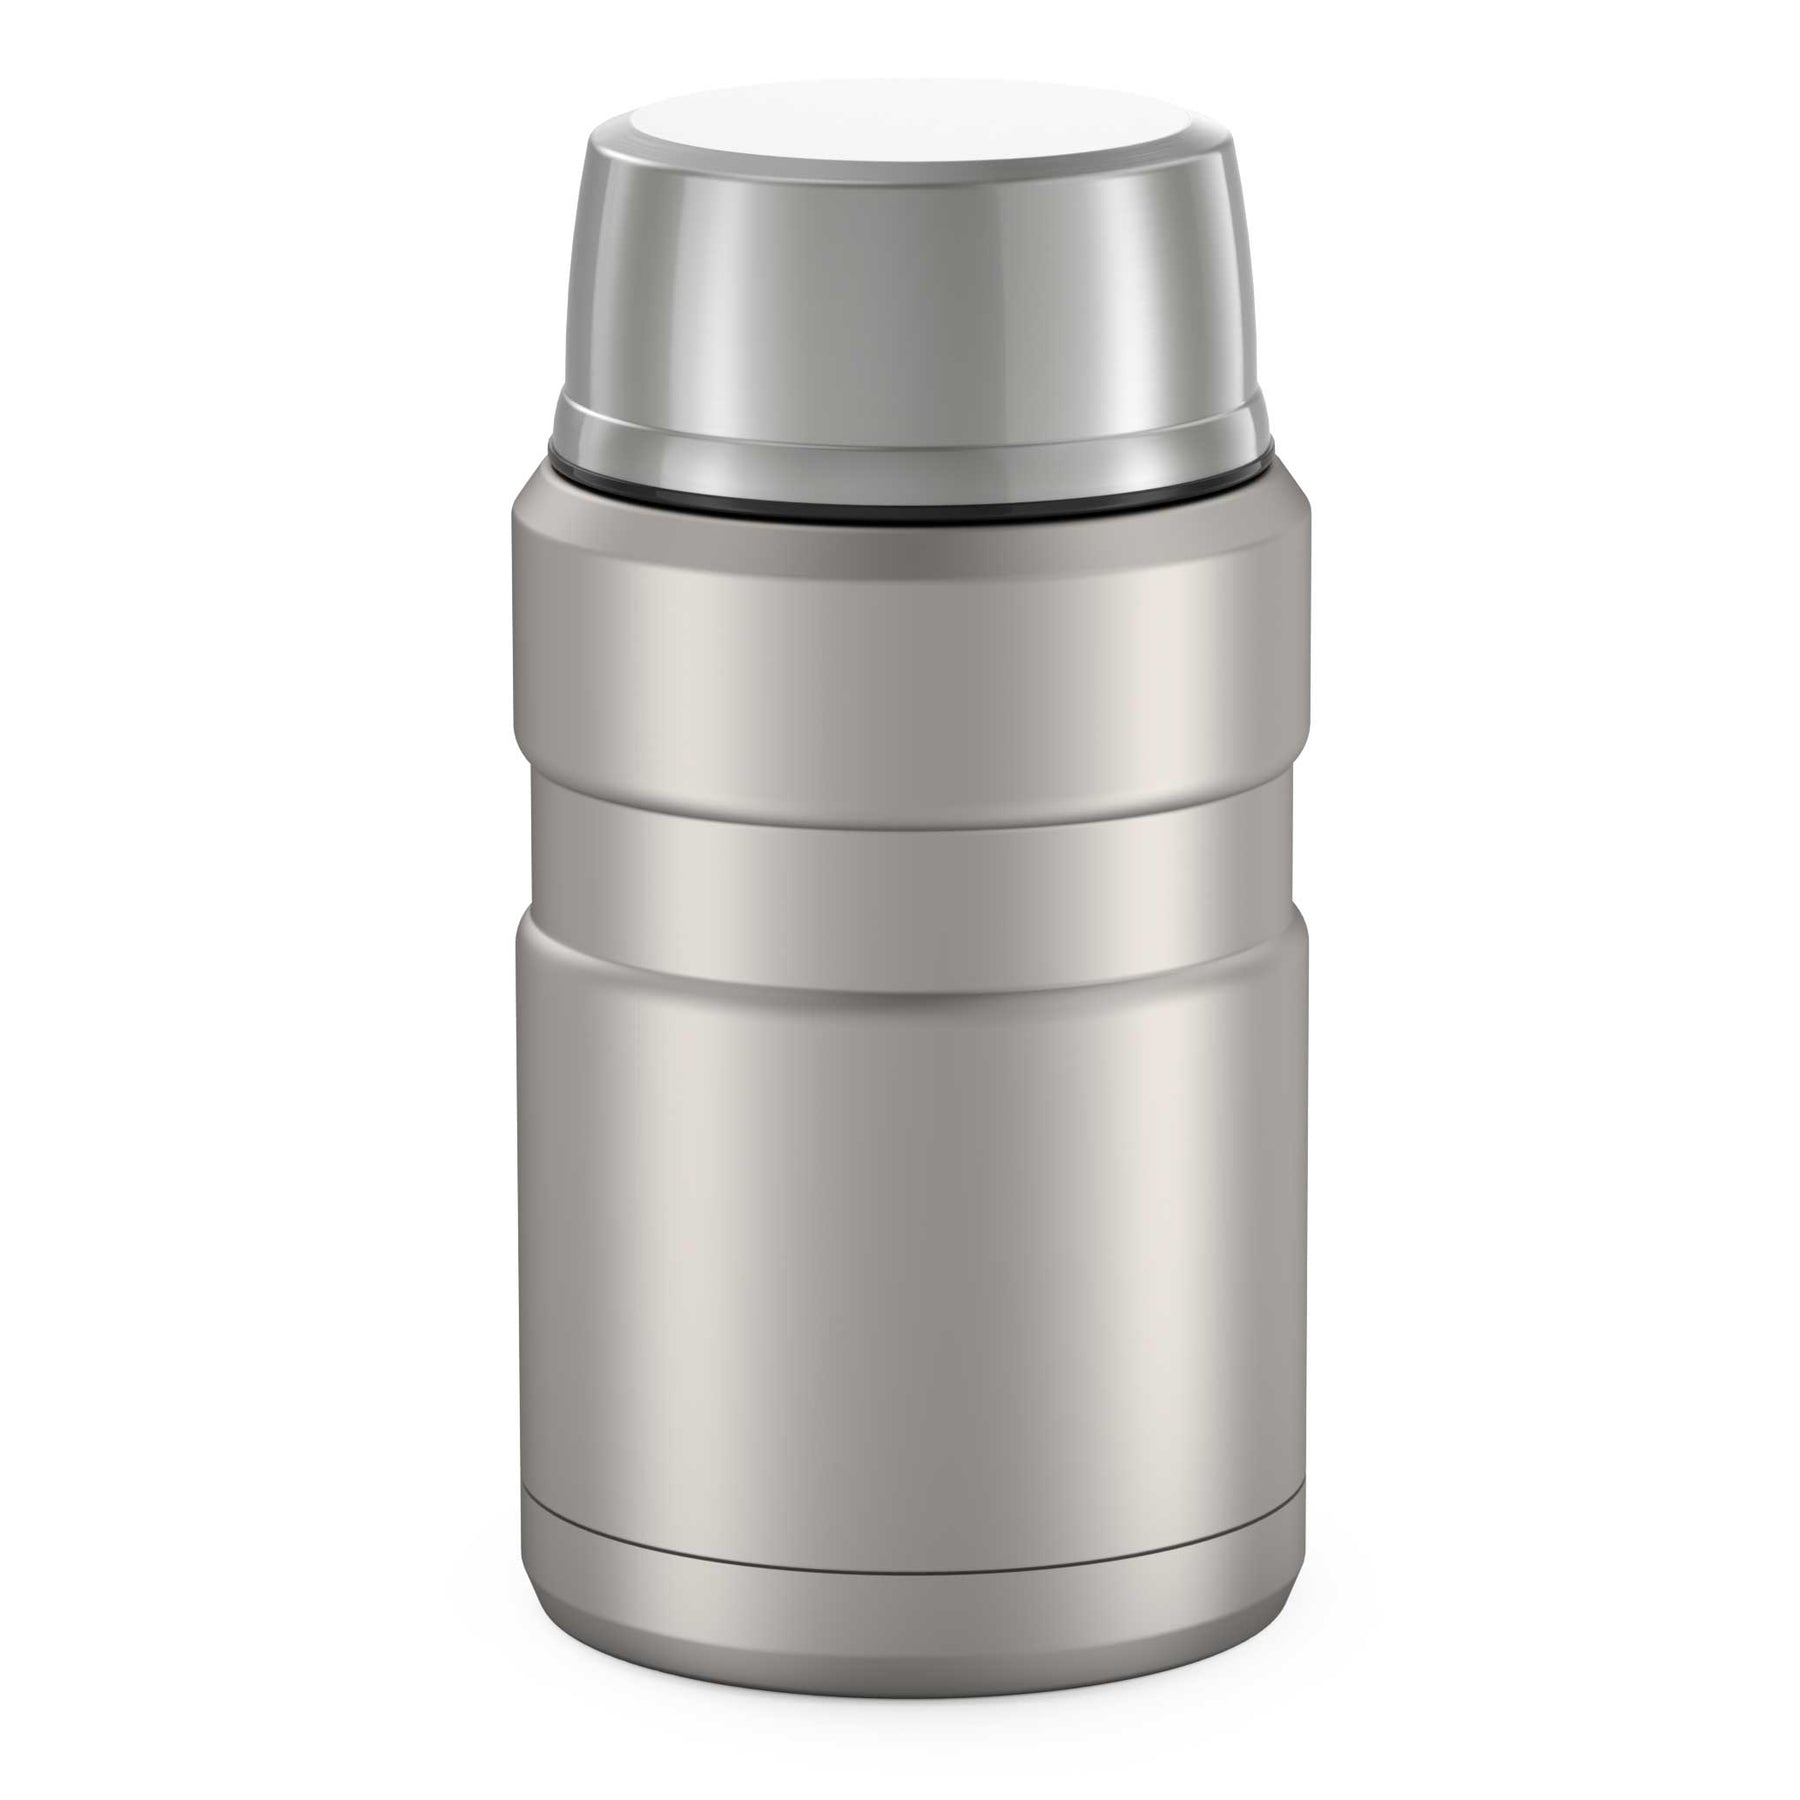 Thermos 12 oz. Stainless Steel Food Jar w/ Microwavable Container -  Silver/Black 